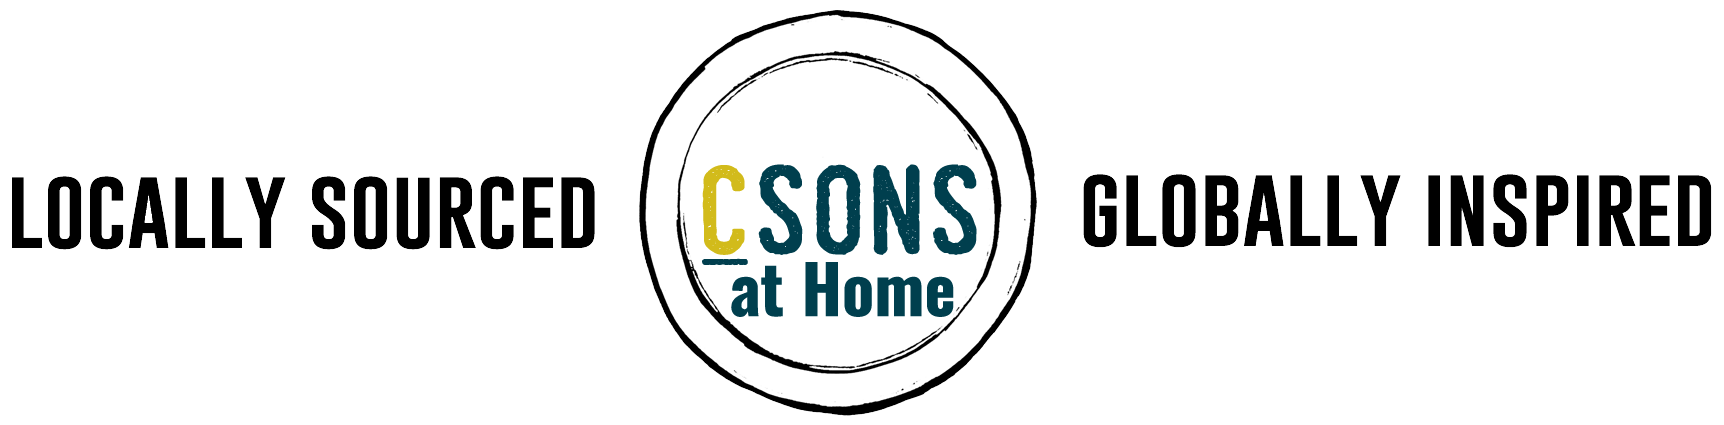 CSONS at Home